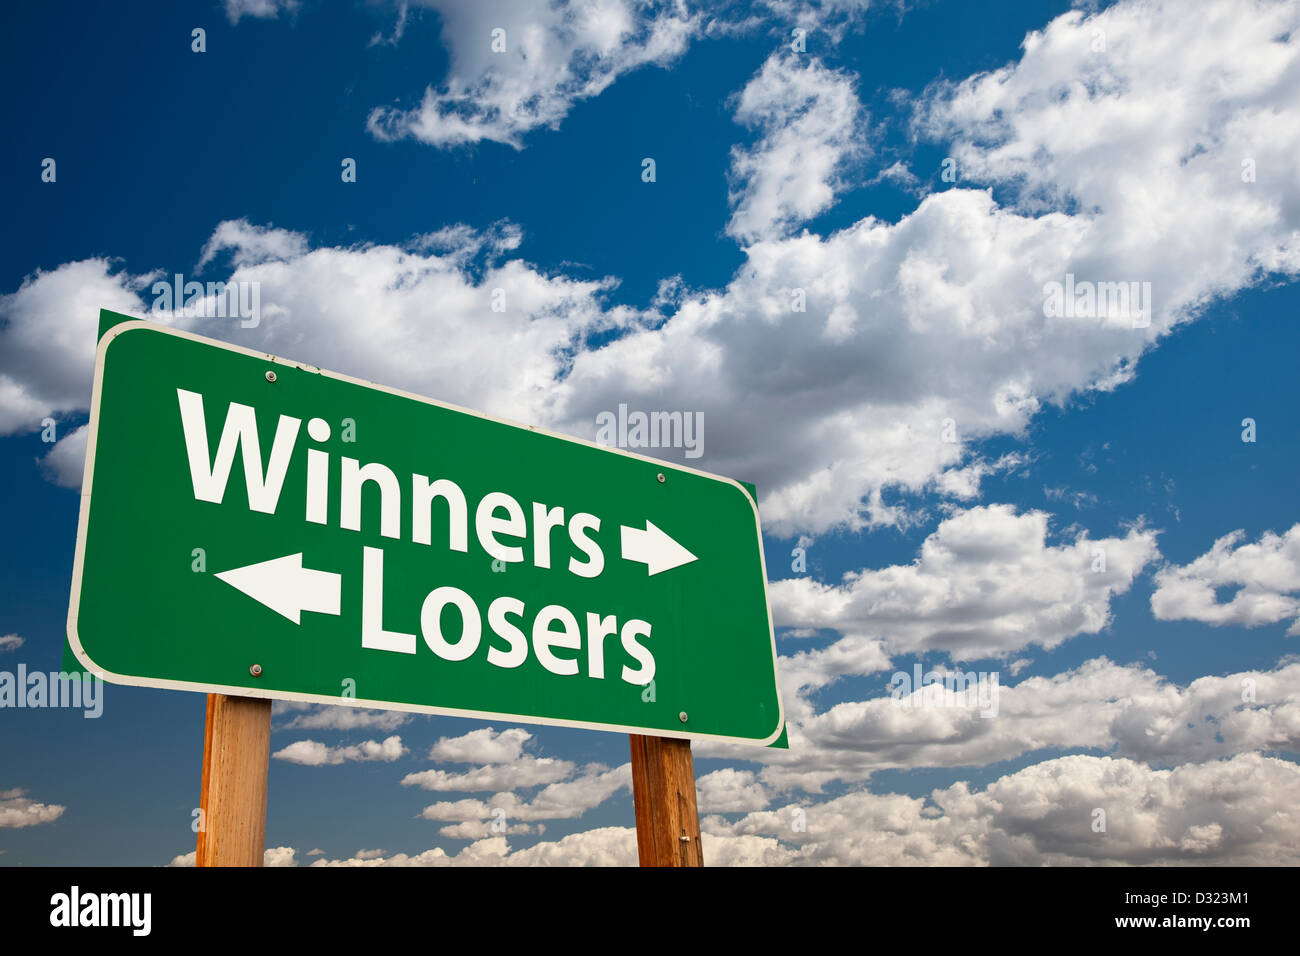 Winners, Losers Green Road Sign Over Dramatic Clouds and Sky. Stock Photo